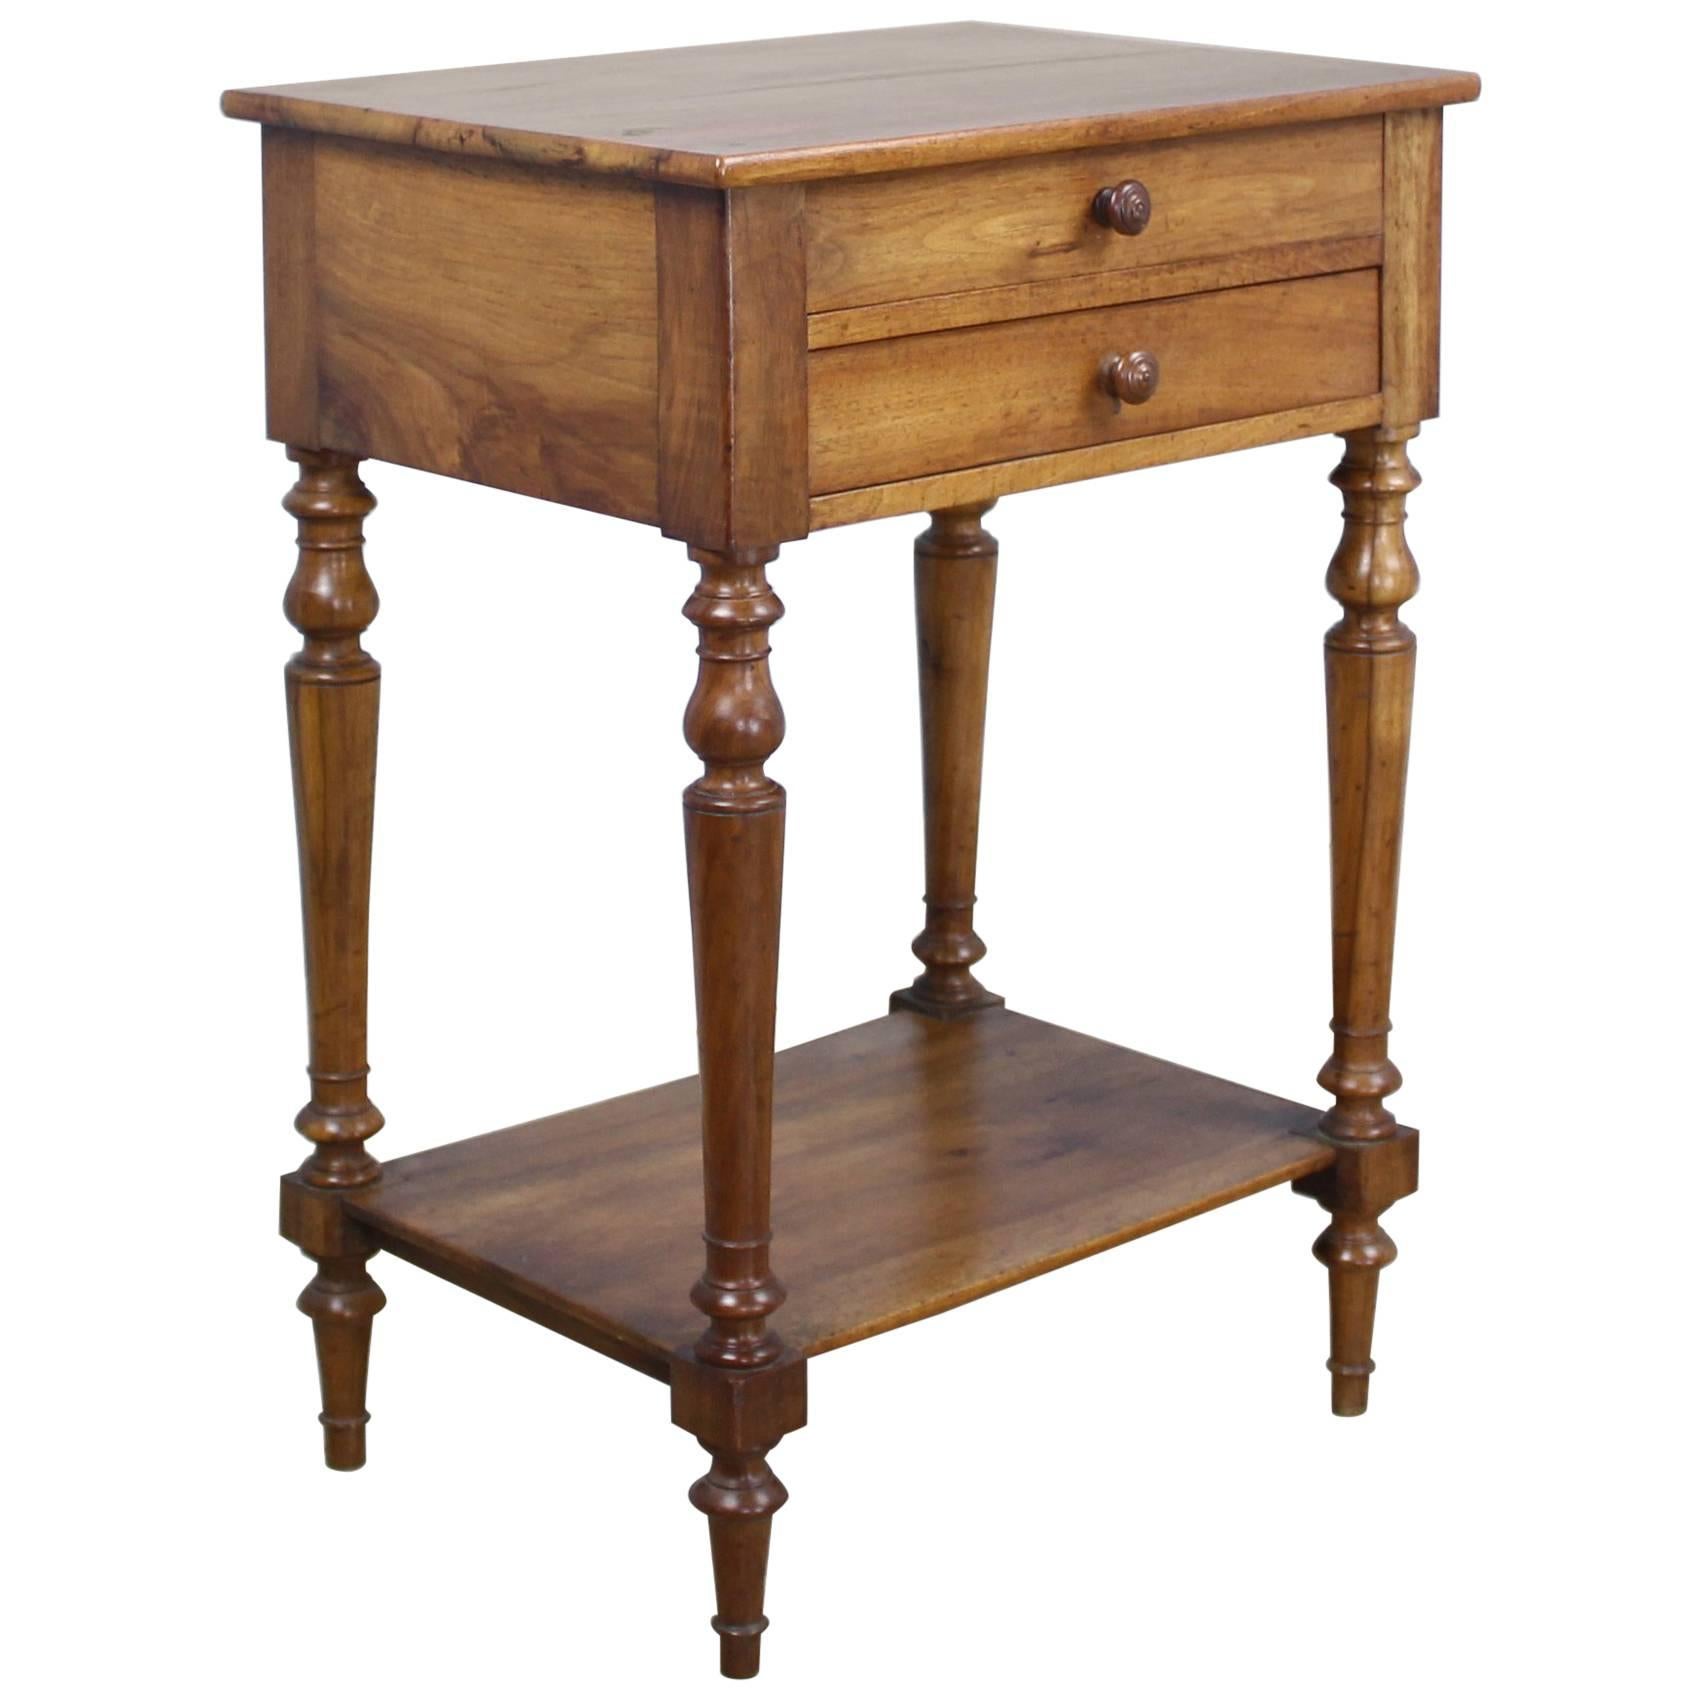 Antique French Walnut Side Table with Turned Legs